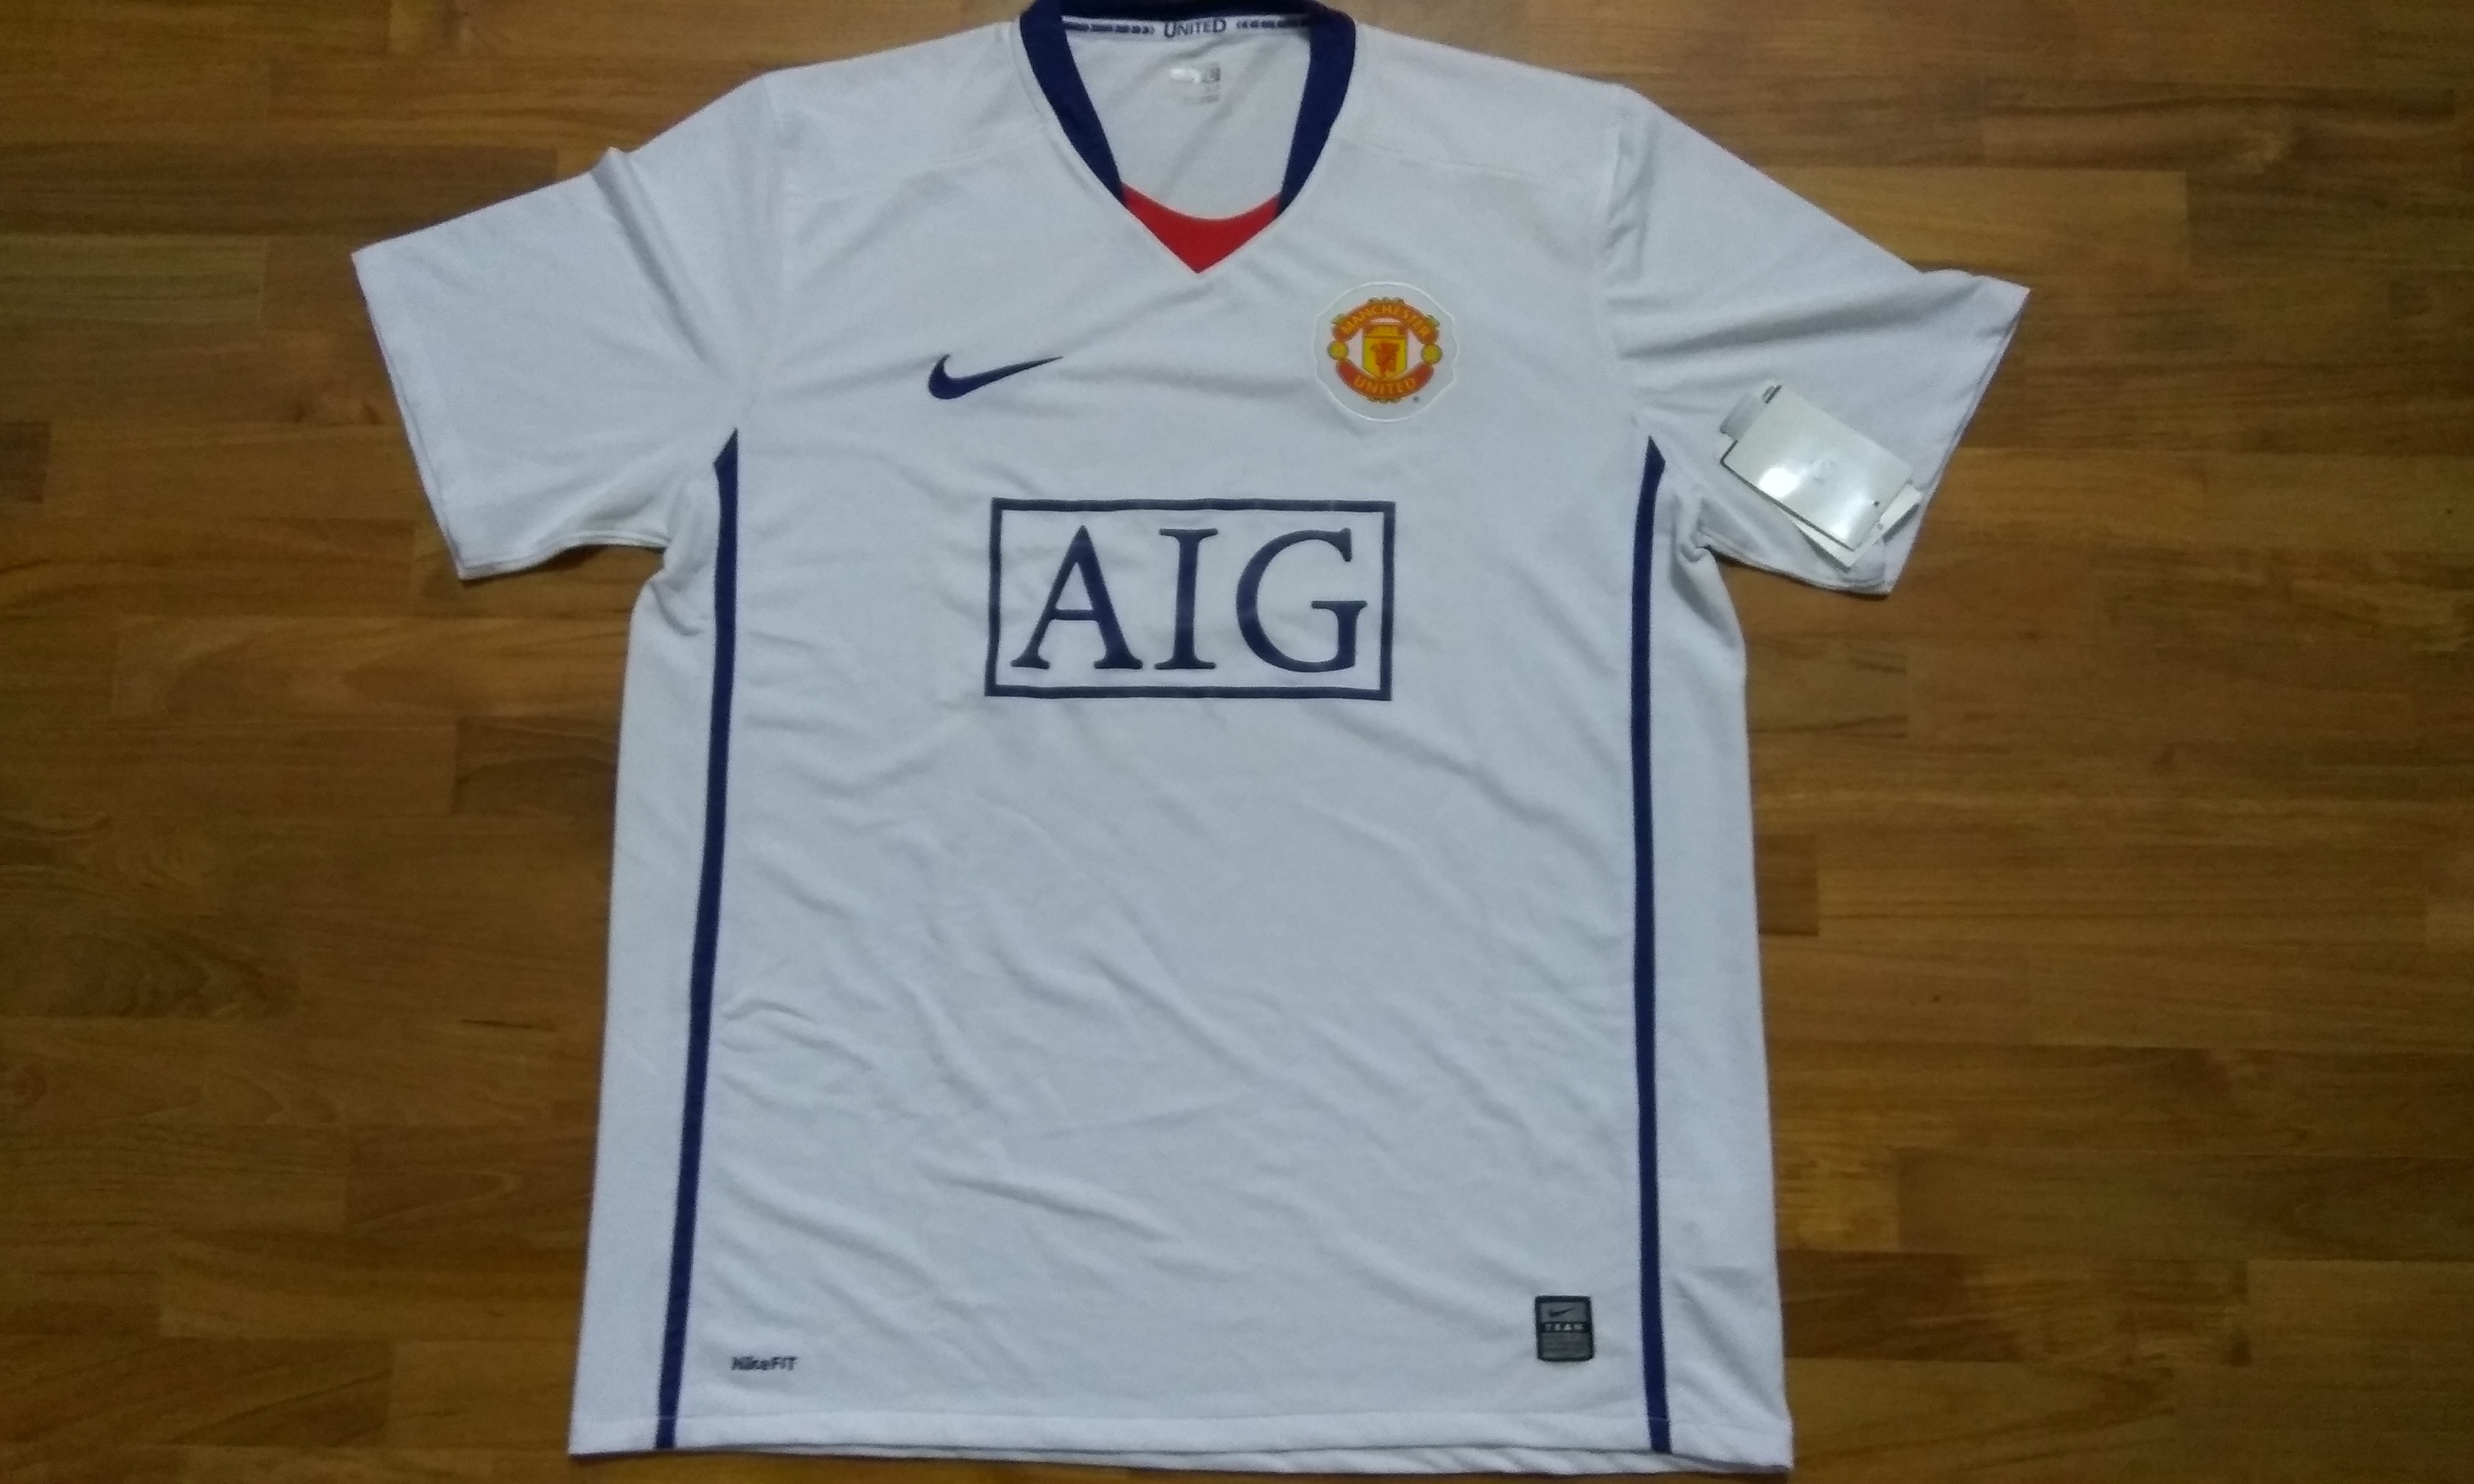 jersey manchester united aig